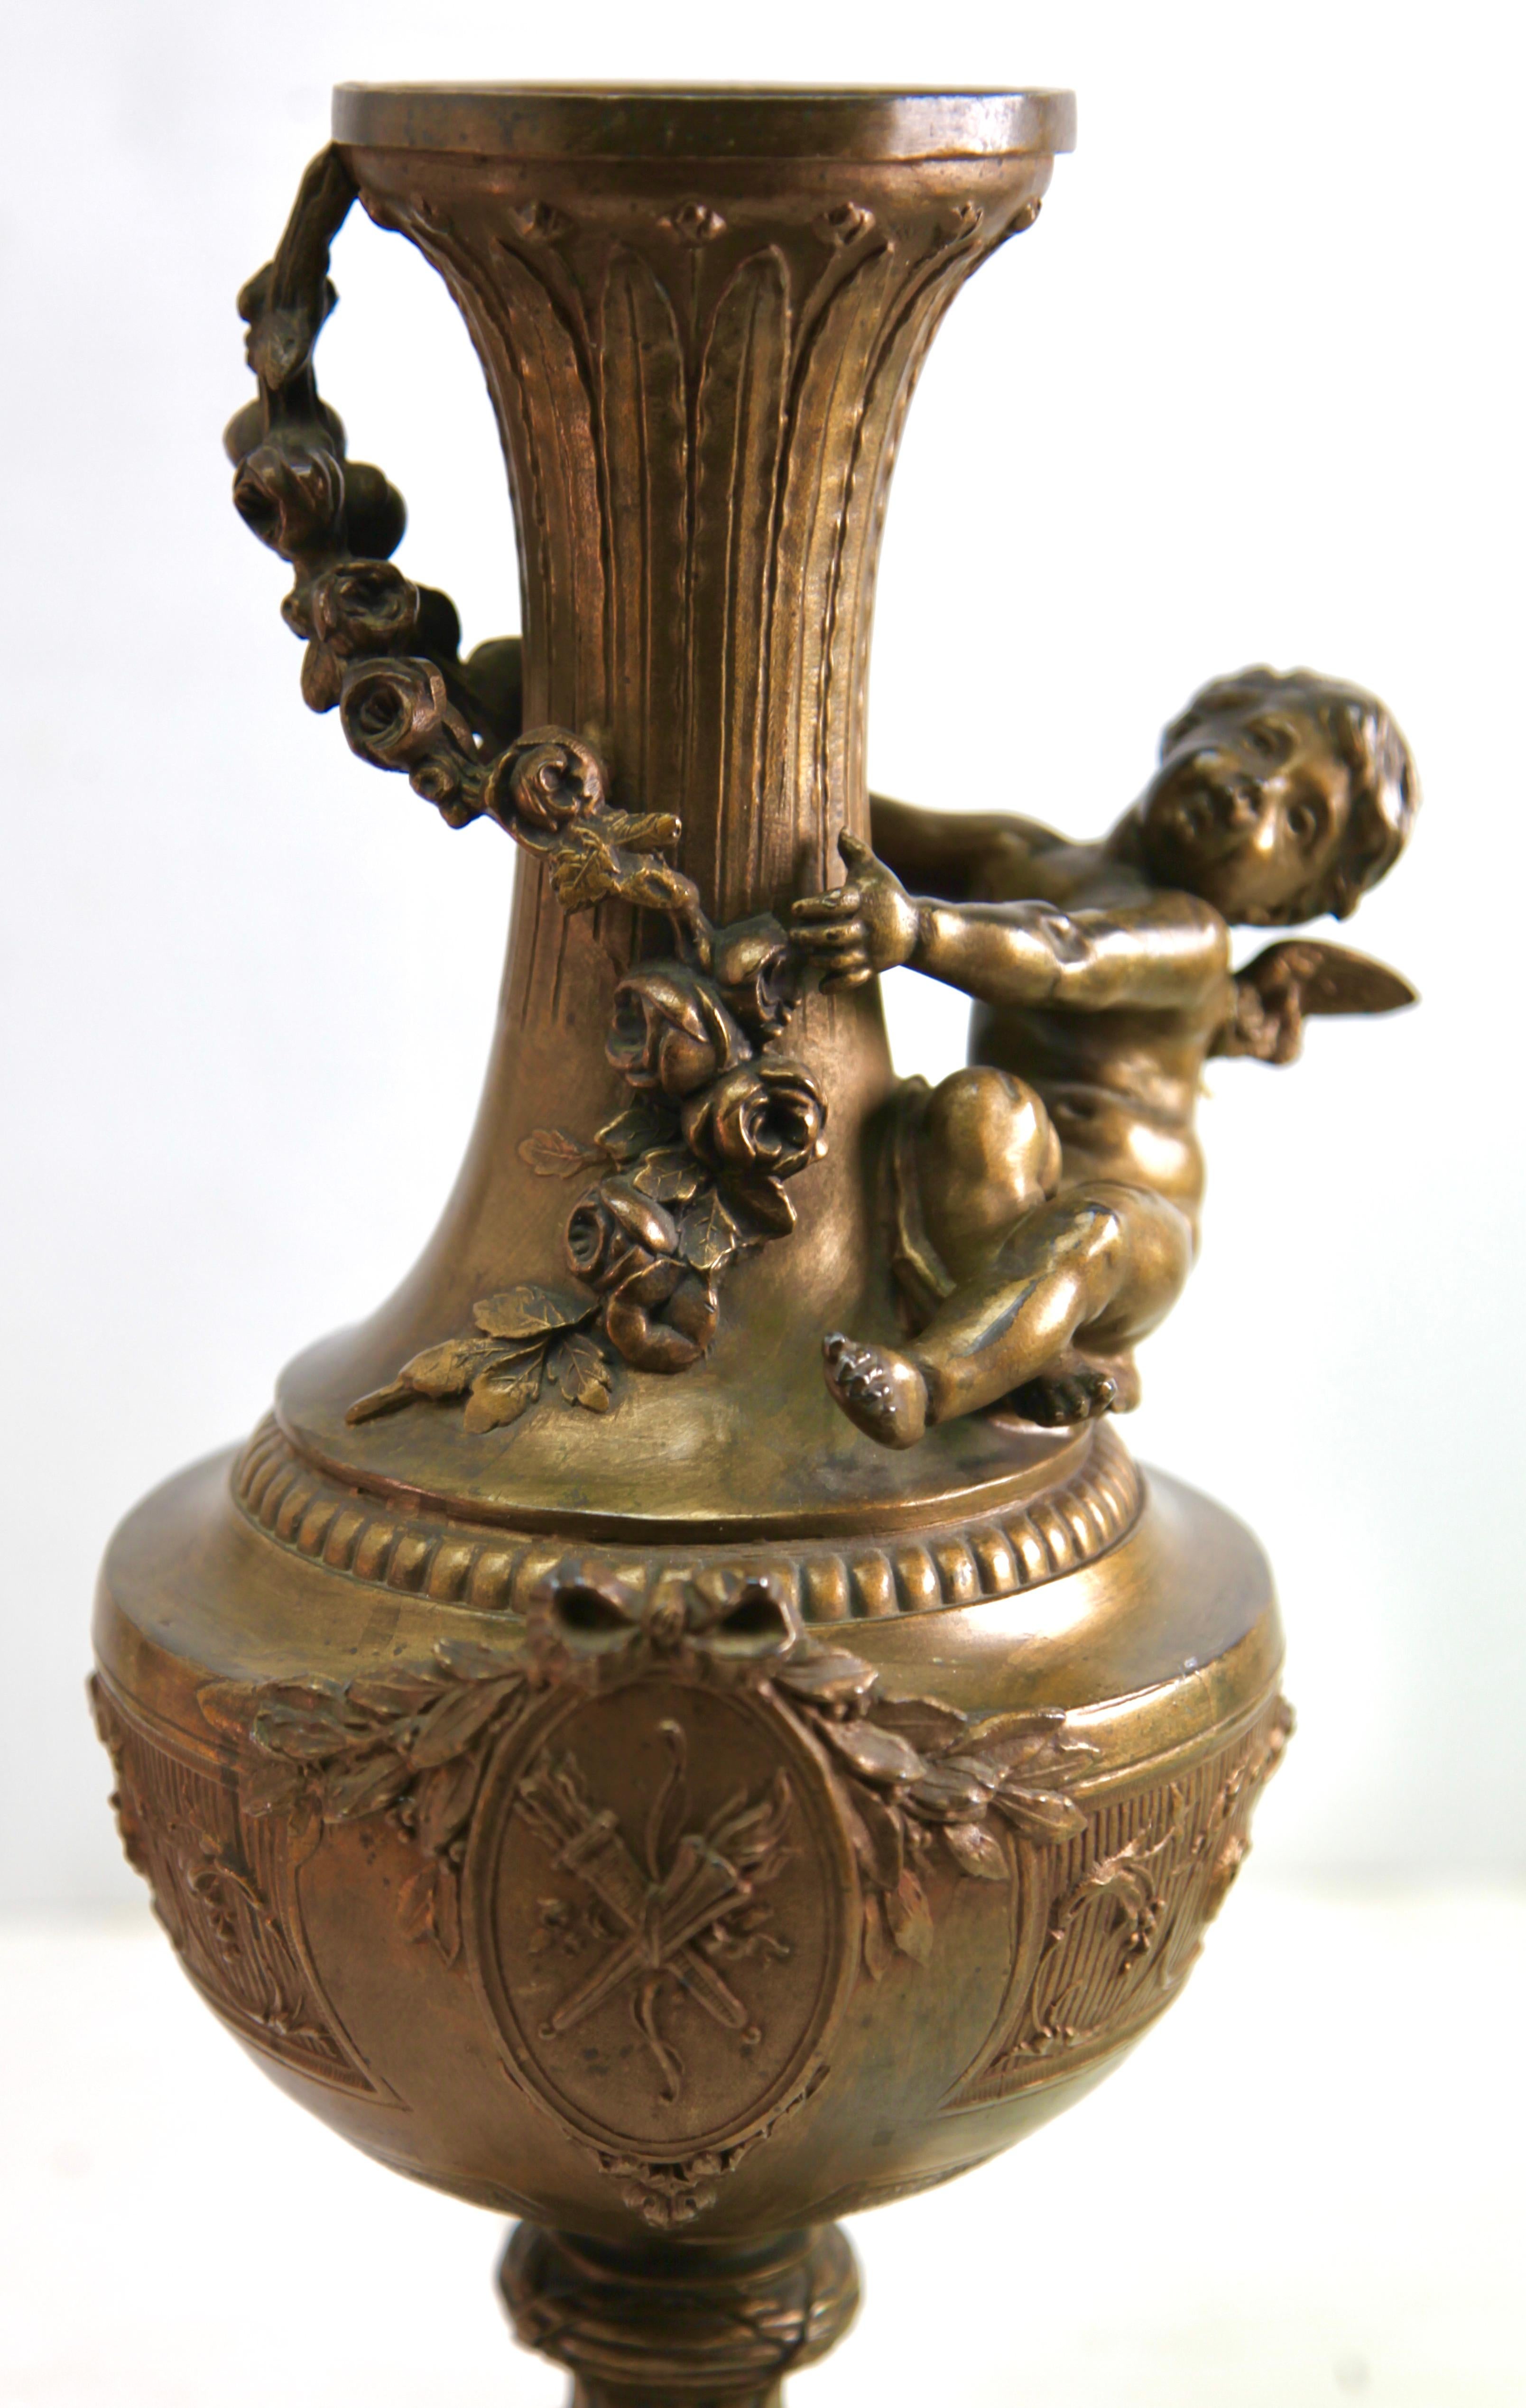 Pair of Ornamented Vases or Lamps with Little Angels and Richly Decorated For Sale 1